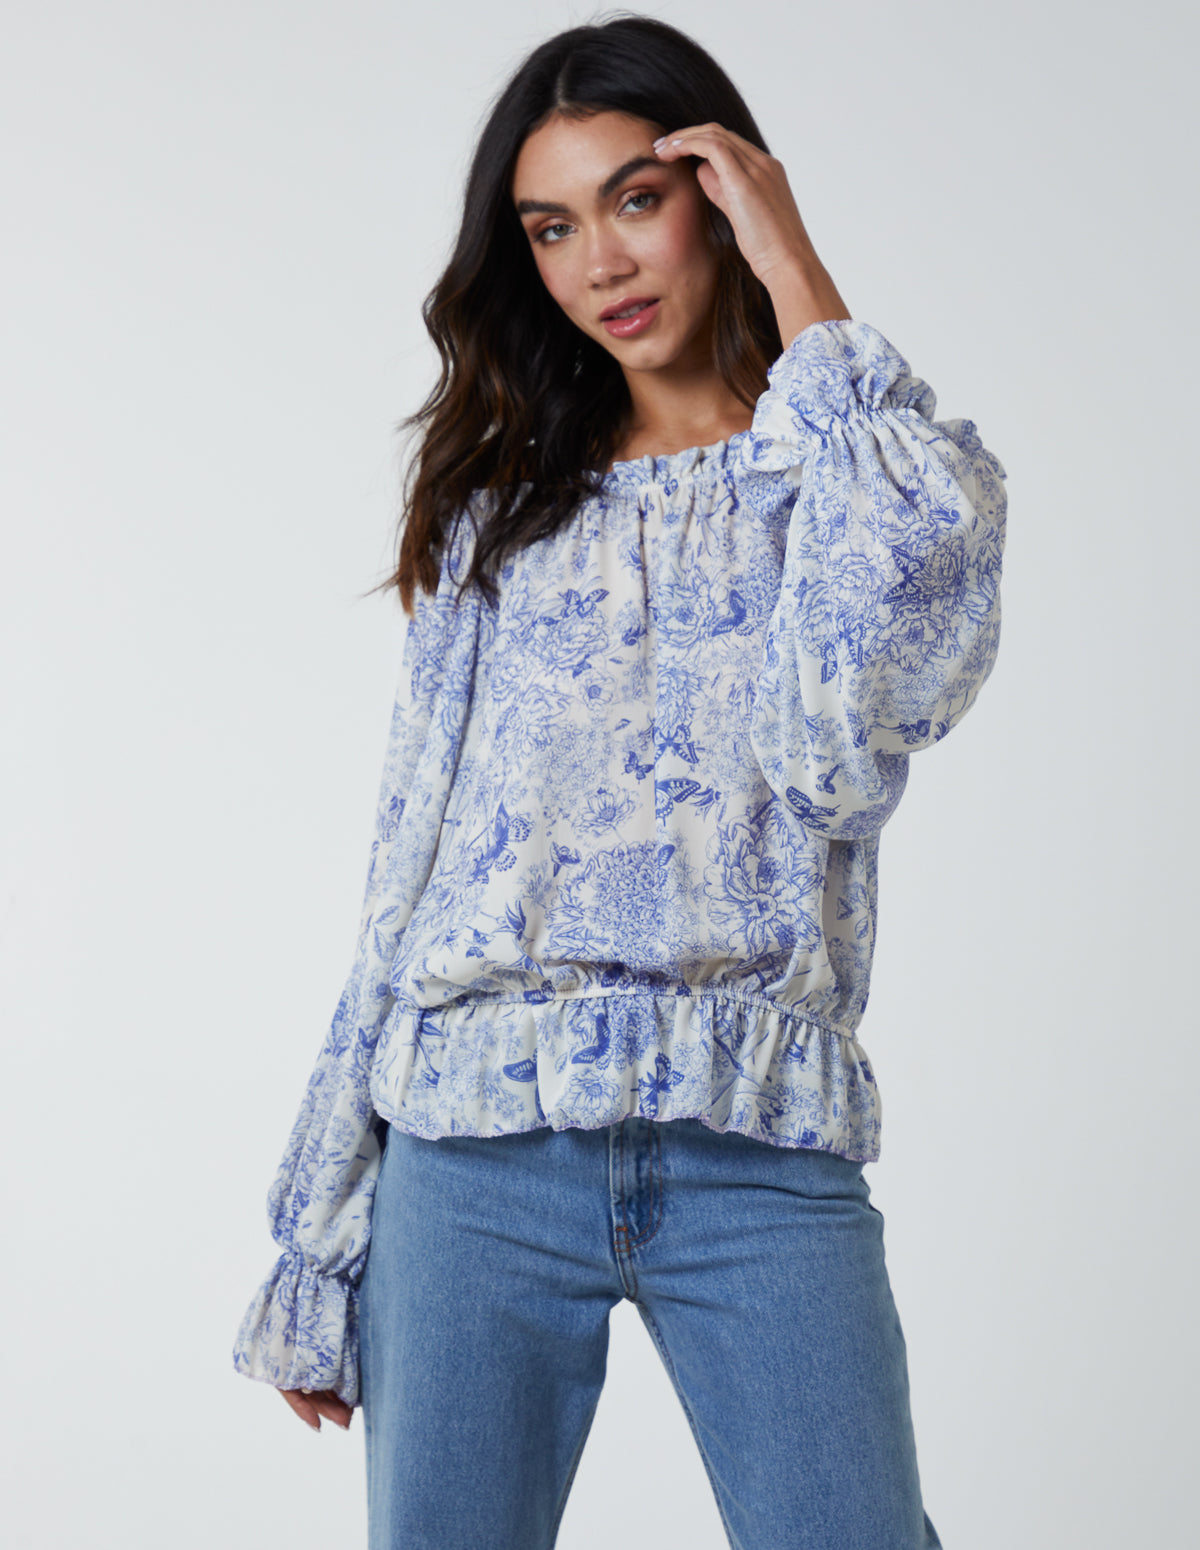 Butterfly Floral Print Gypsy Chiffon Blouse 